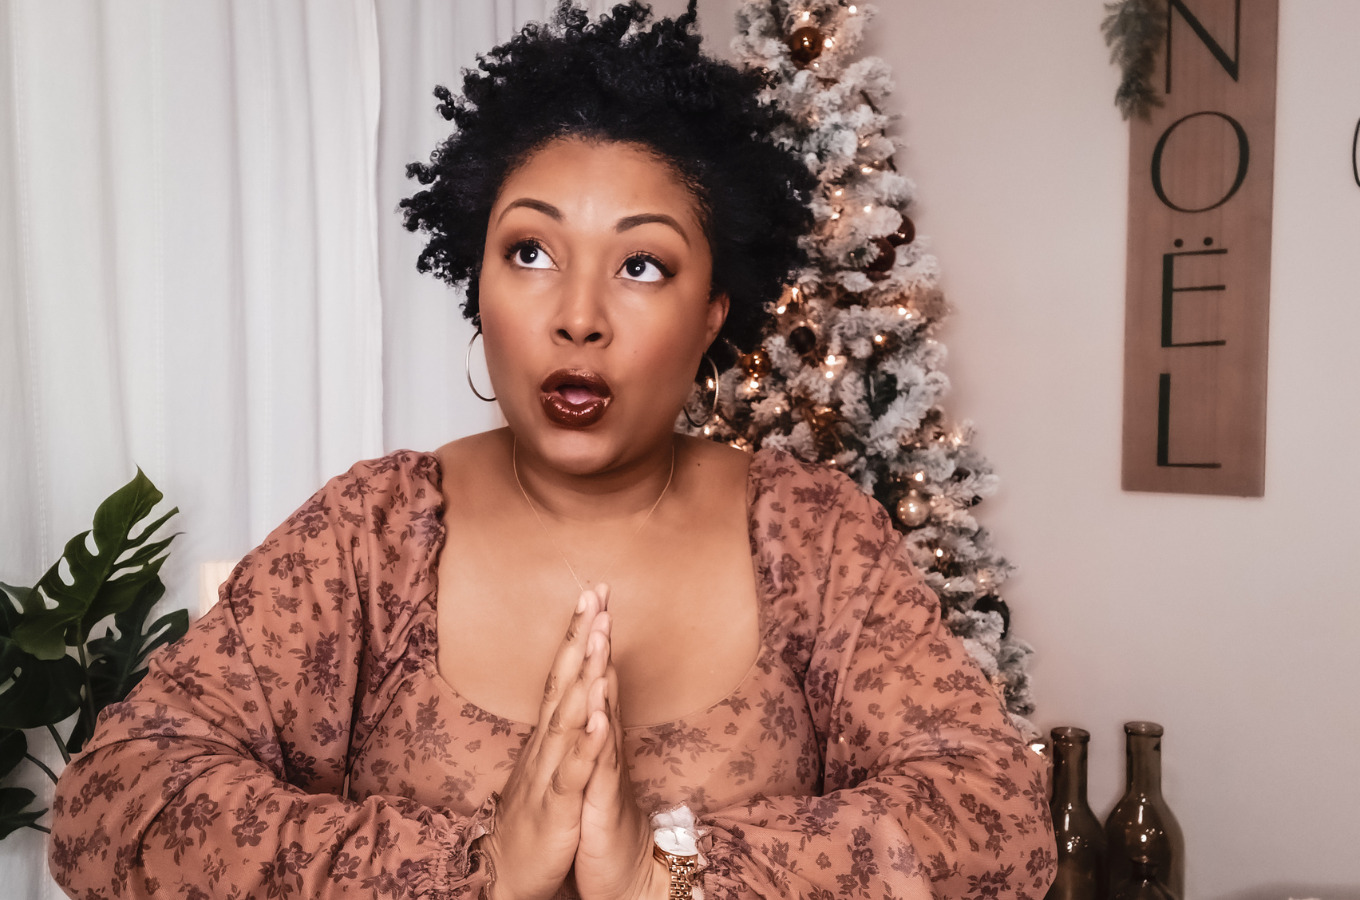 A light skinned black girl with natural curly hair sits in front of a Christmas tree with her hands in the prayer stance